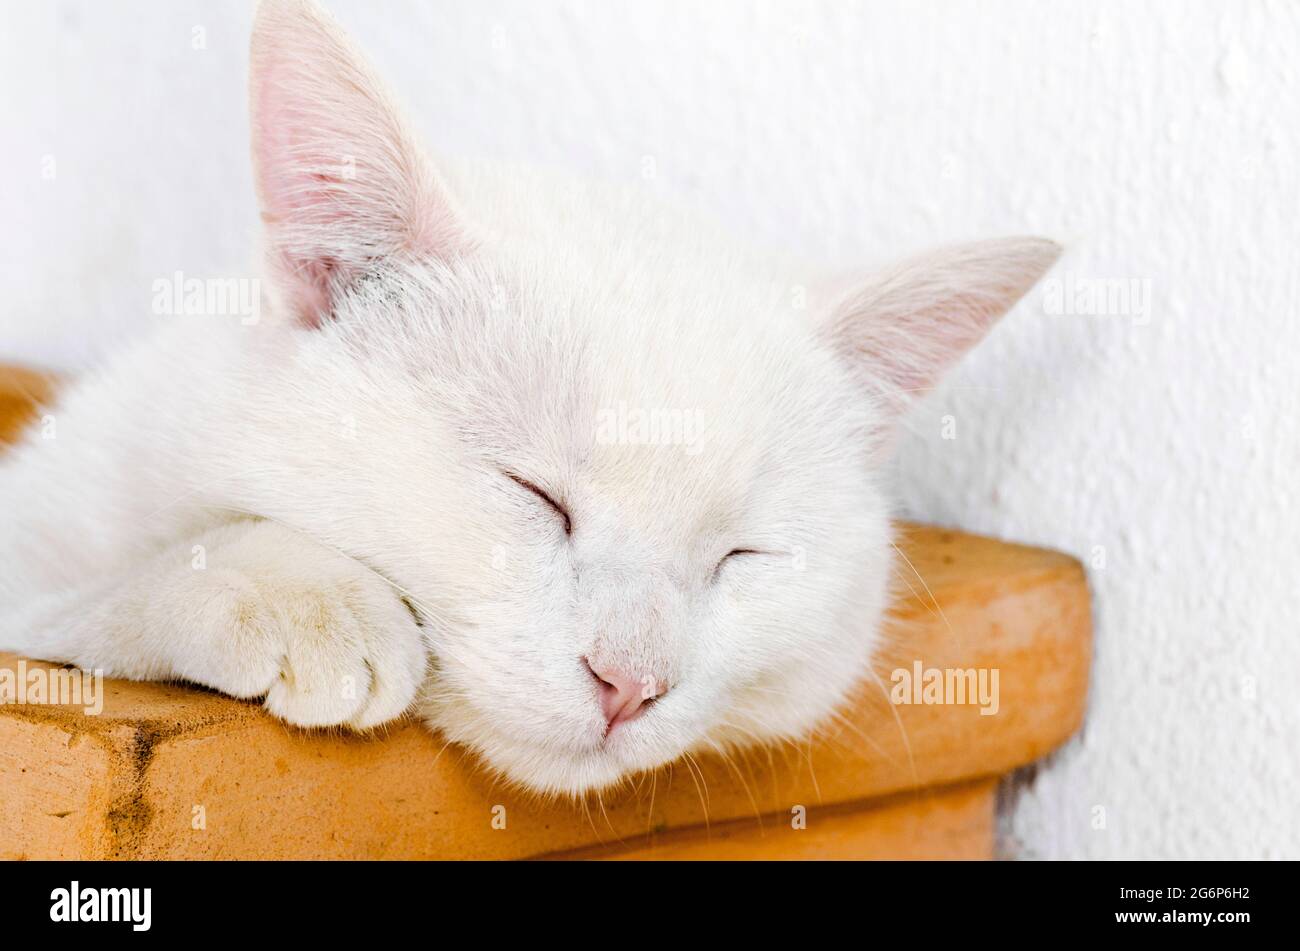 Close-up of a white cat sleeping in flower pot outdoors Stock Photo